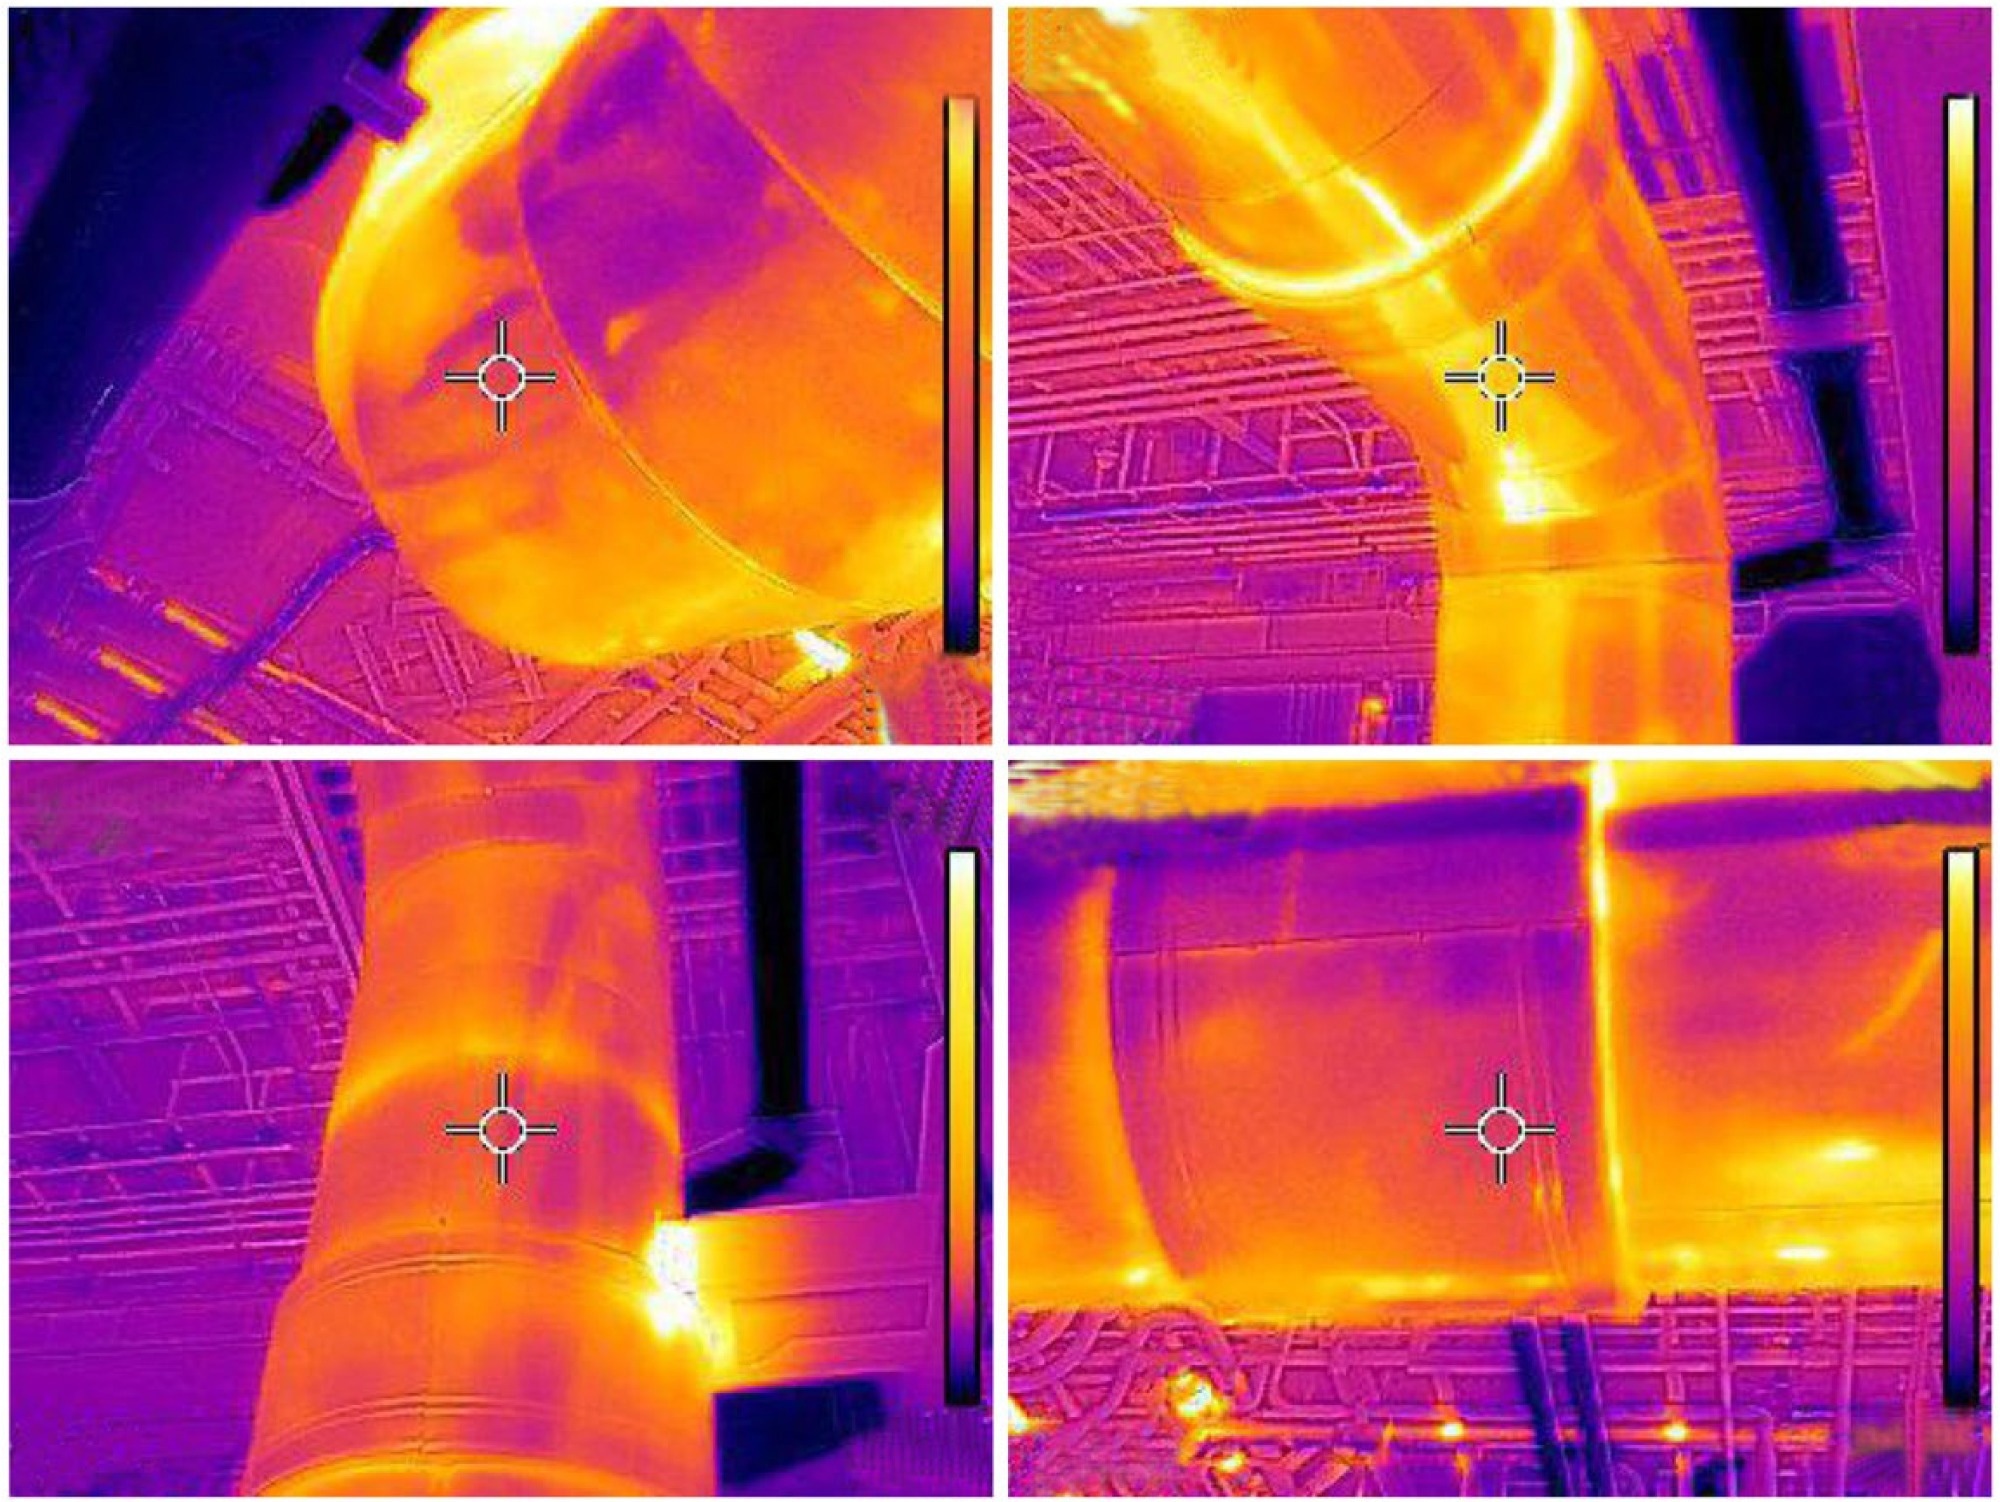 Thermal inspection of areas for the TEG applications.